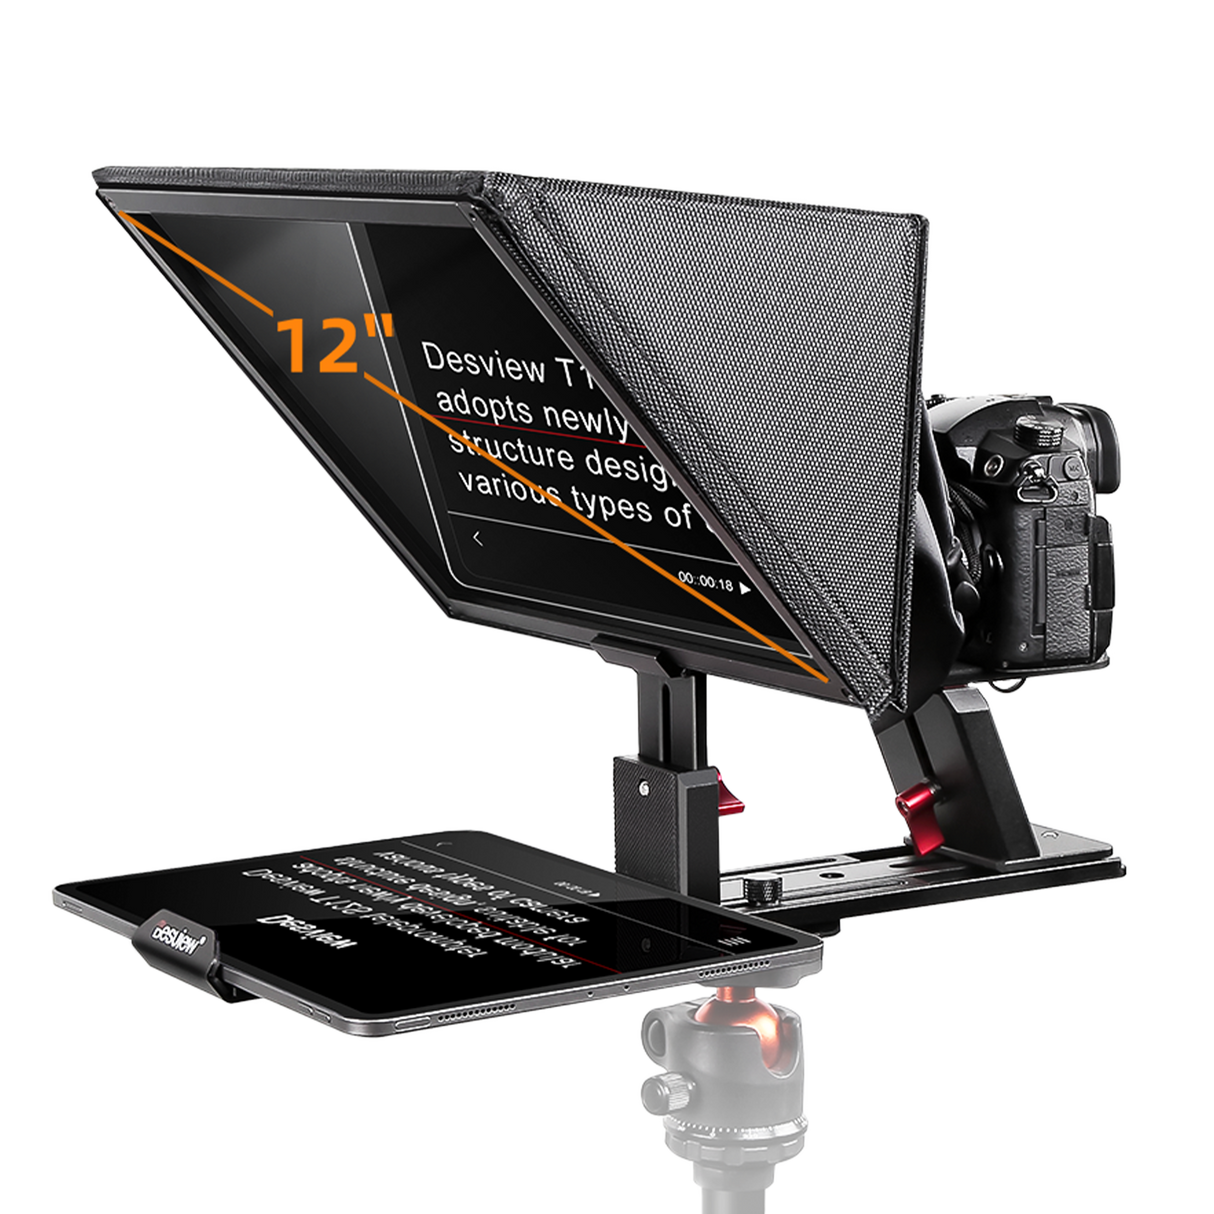 Desview T12S - Teleprompter for 12.9"smartphones & tablets